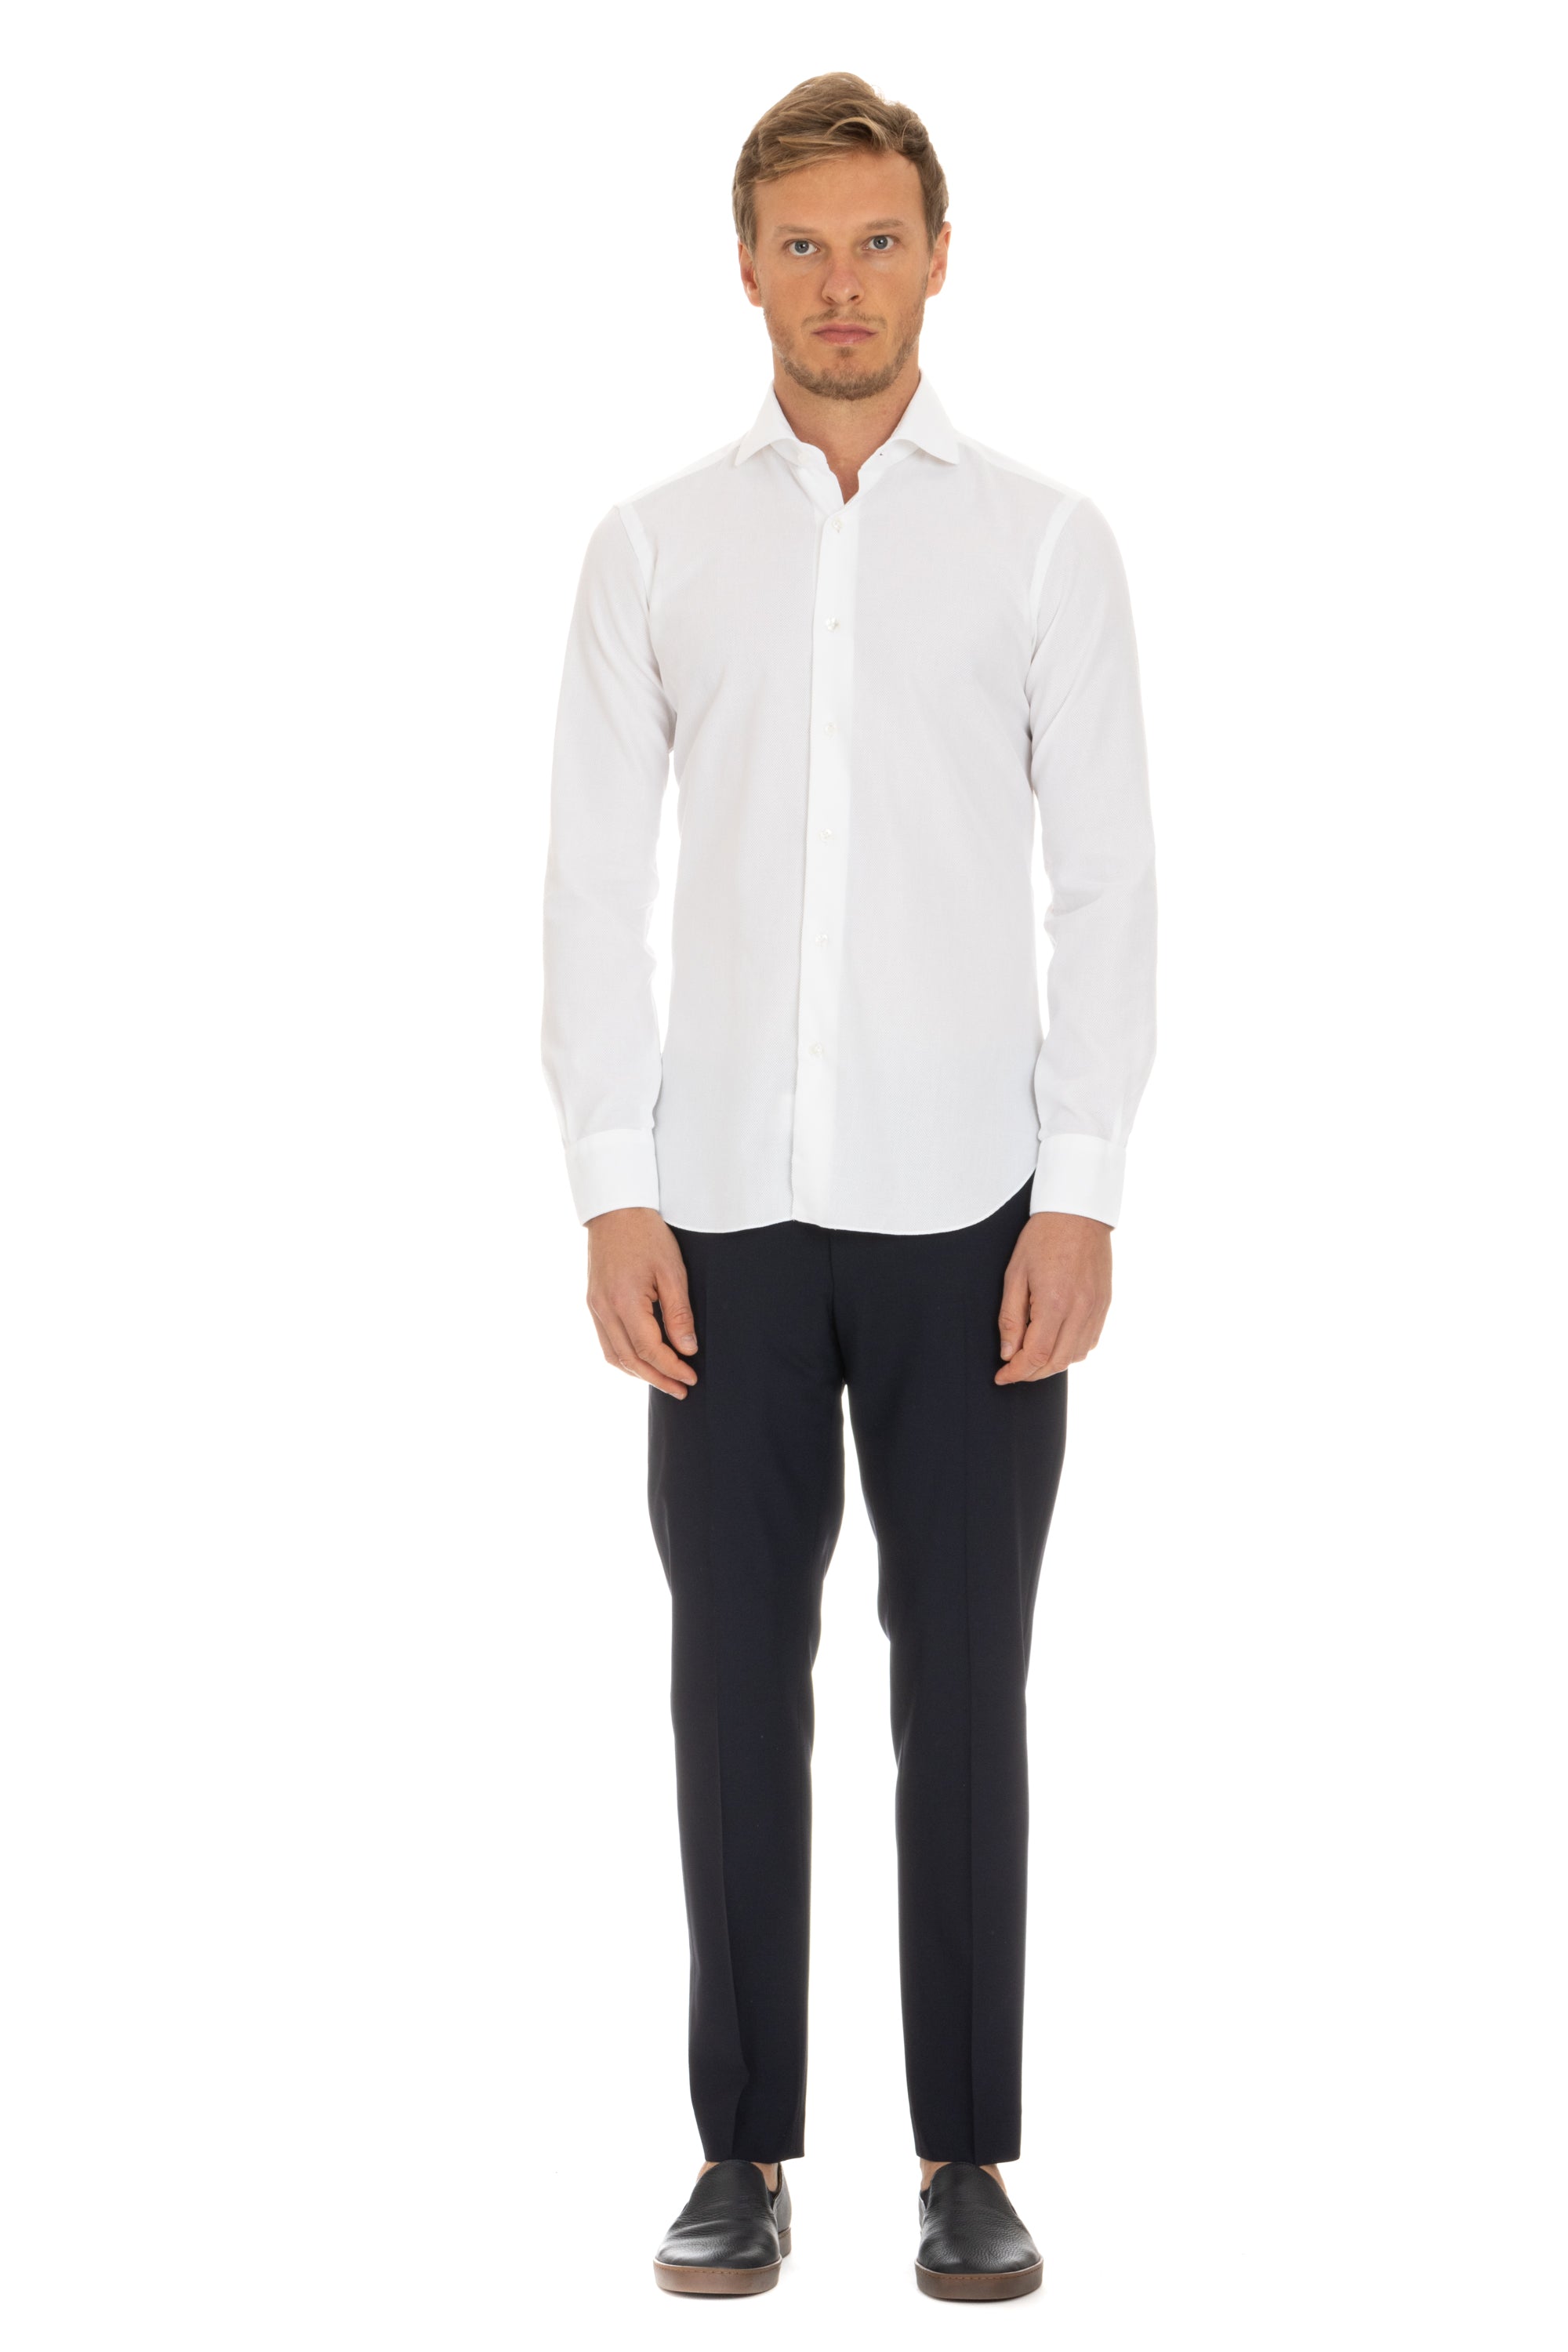 Culto label stretch honeycomb tailored shirt